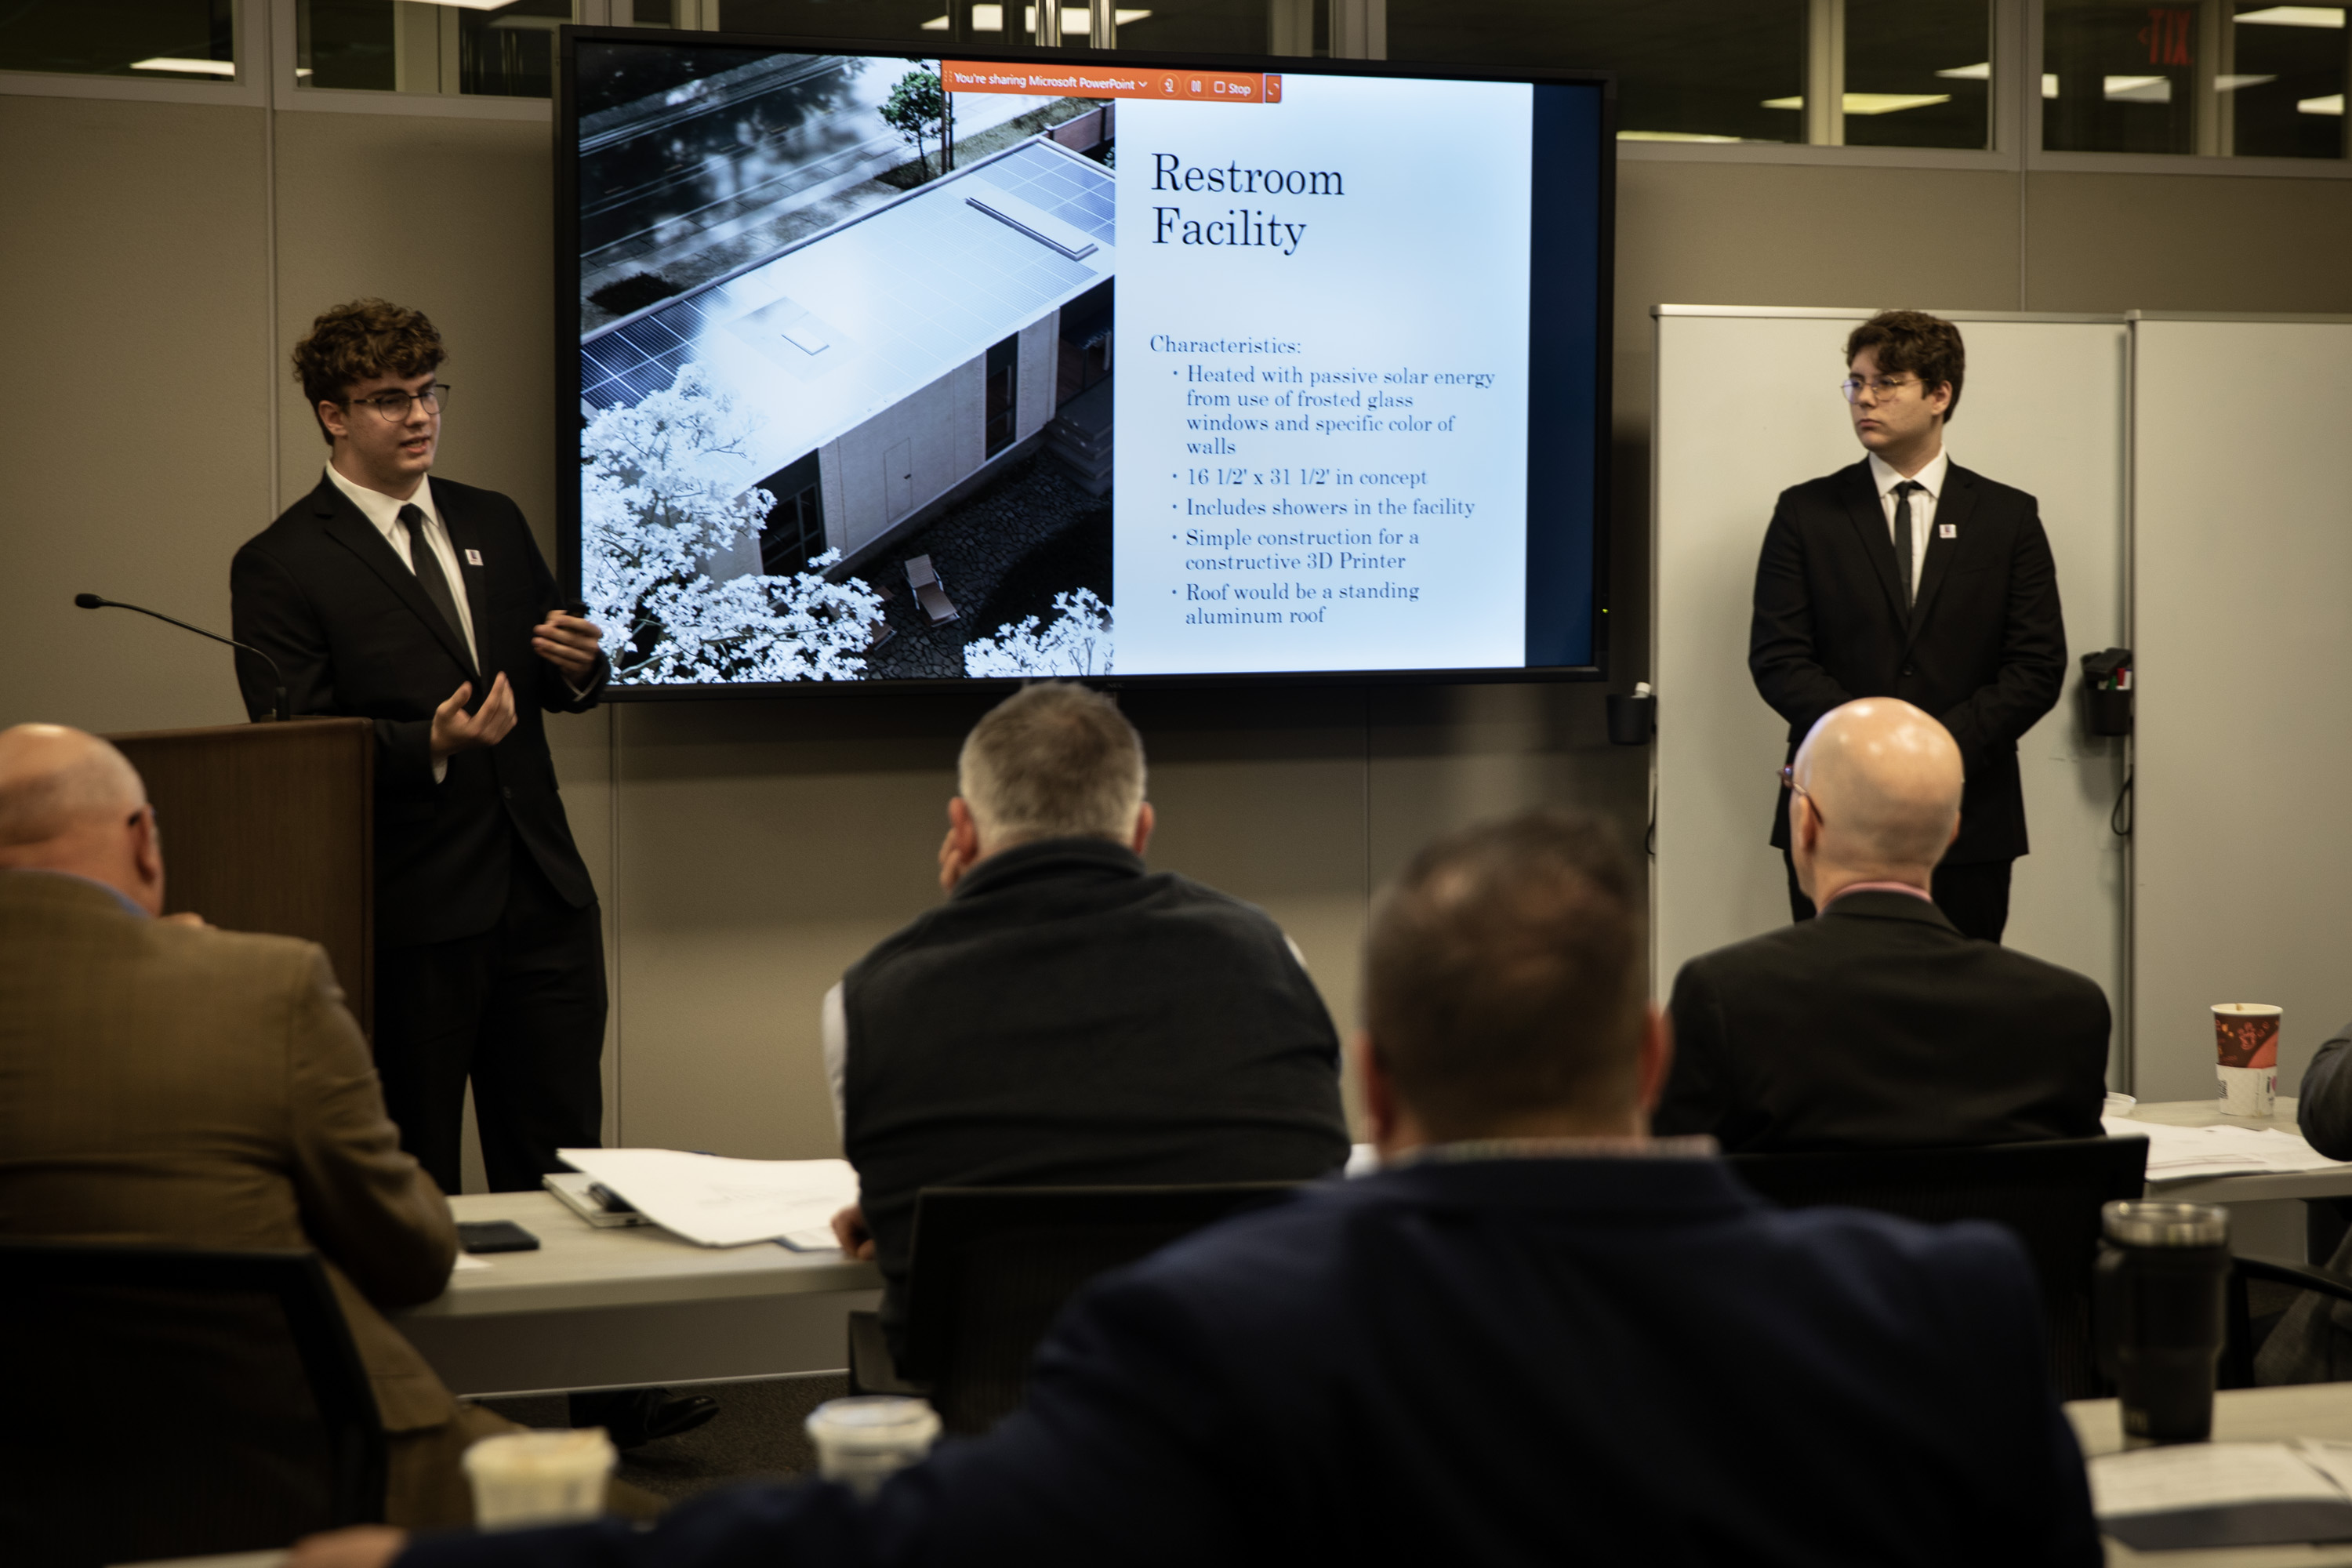 Elijah Mumau and Robert John, the team from Lenape Technical School, standing at the front of a room presenting to the PennDOT Secretary and a panel of judges with a screen behind them showing their PowerPoint presentation